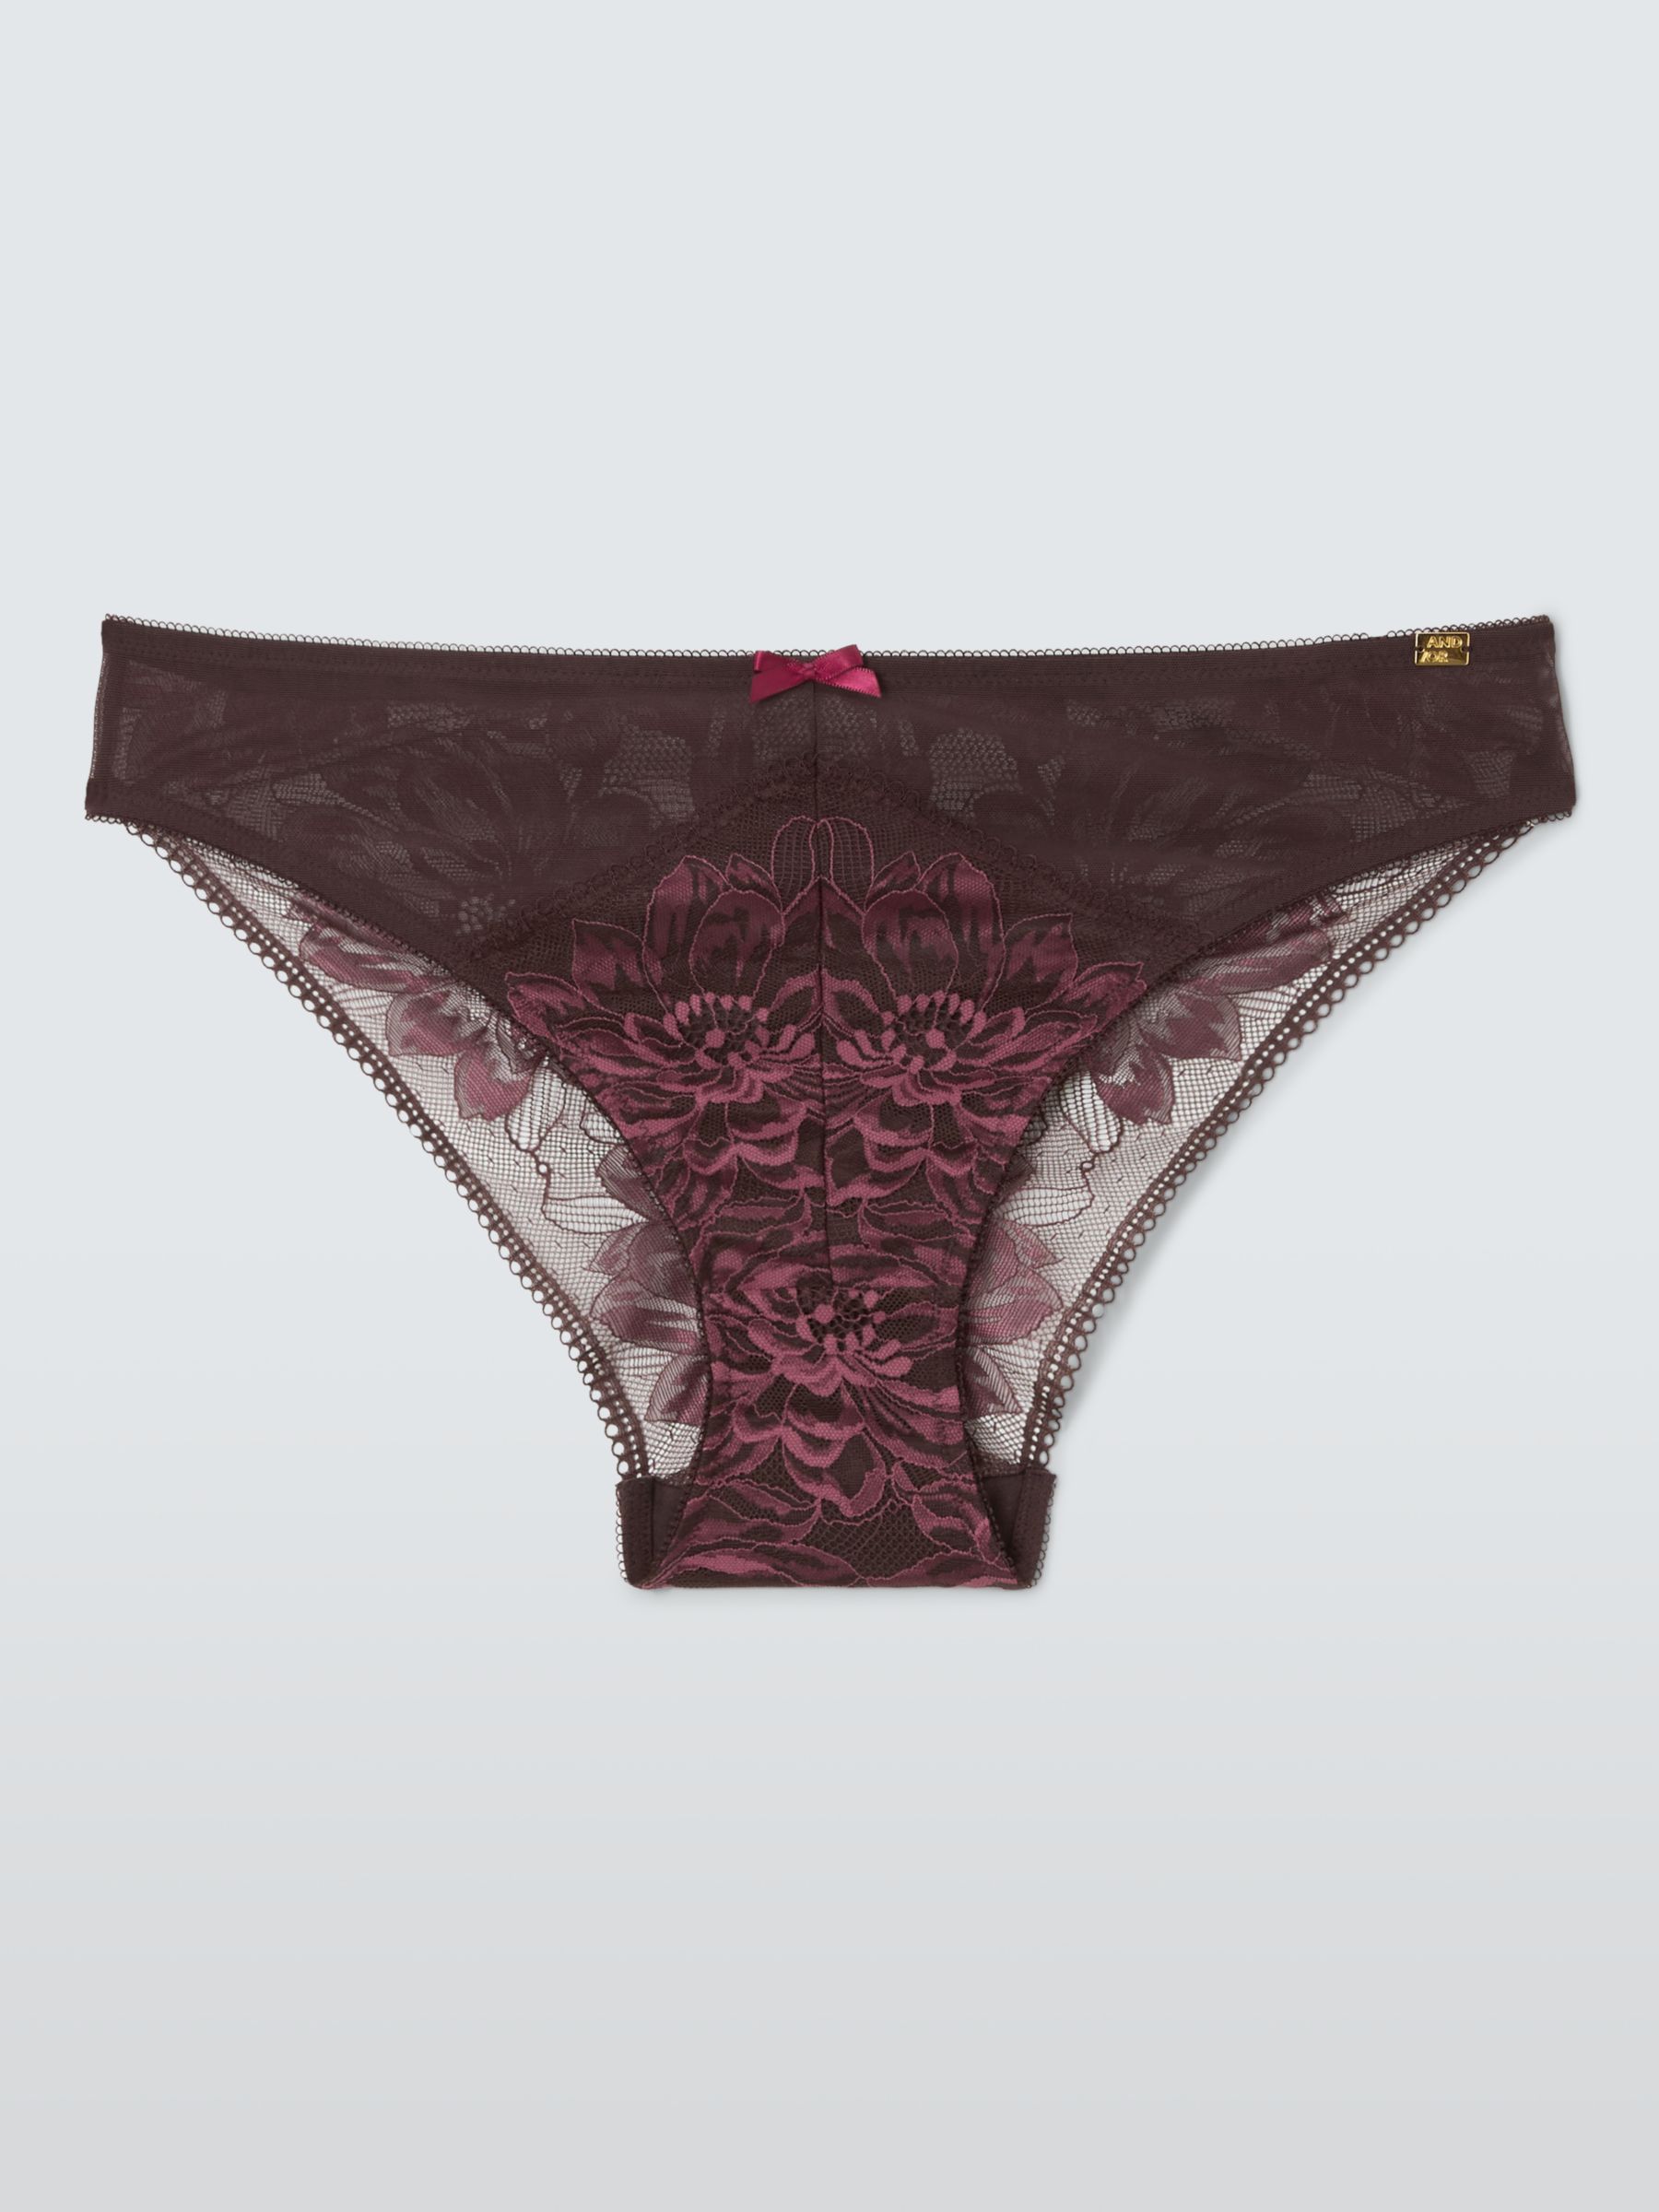 AND/OR Cindy Lace Briefs, Plum, 12